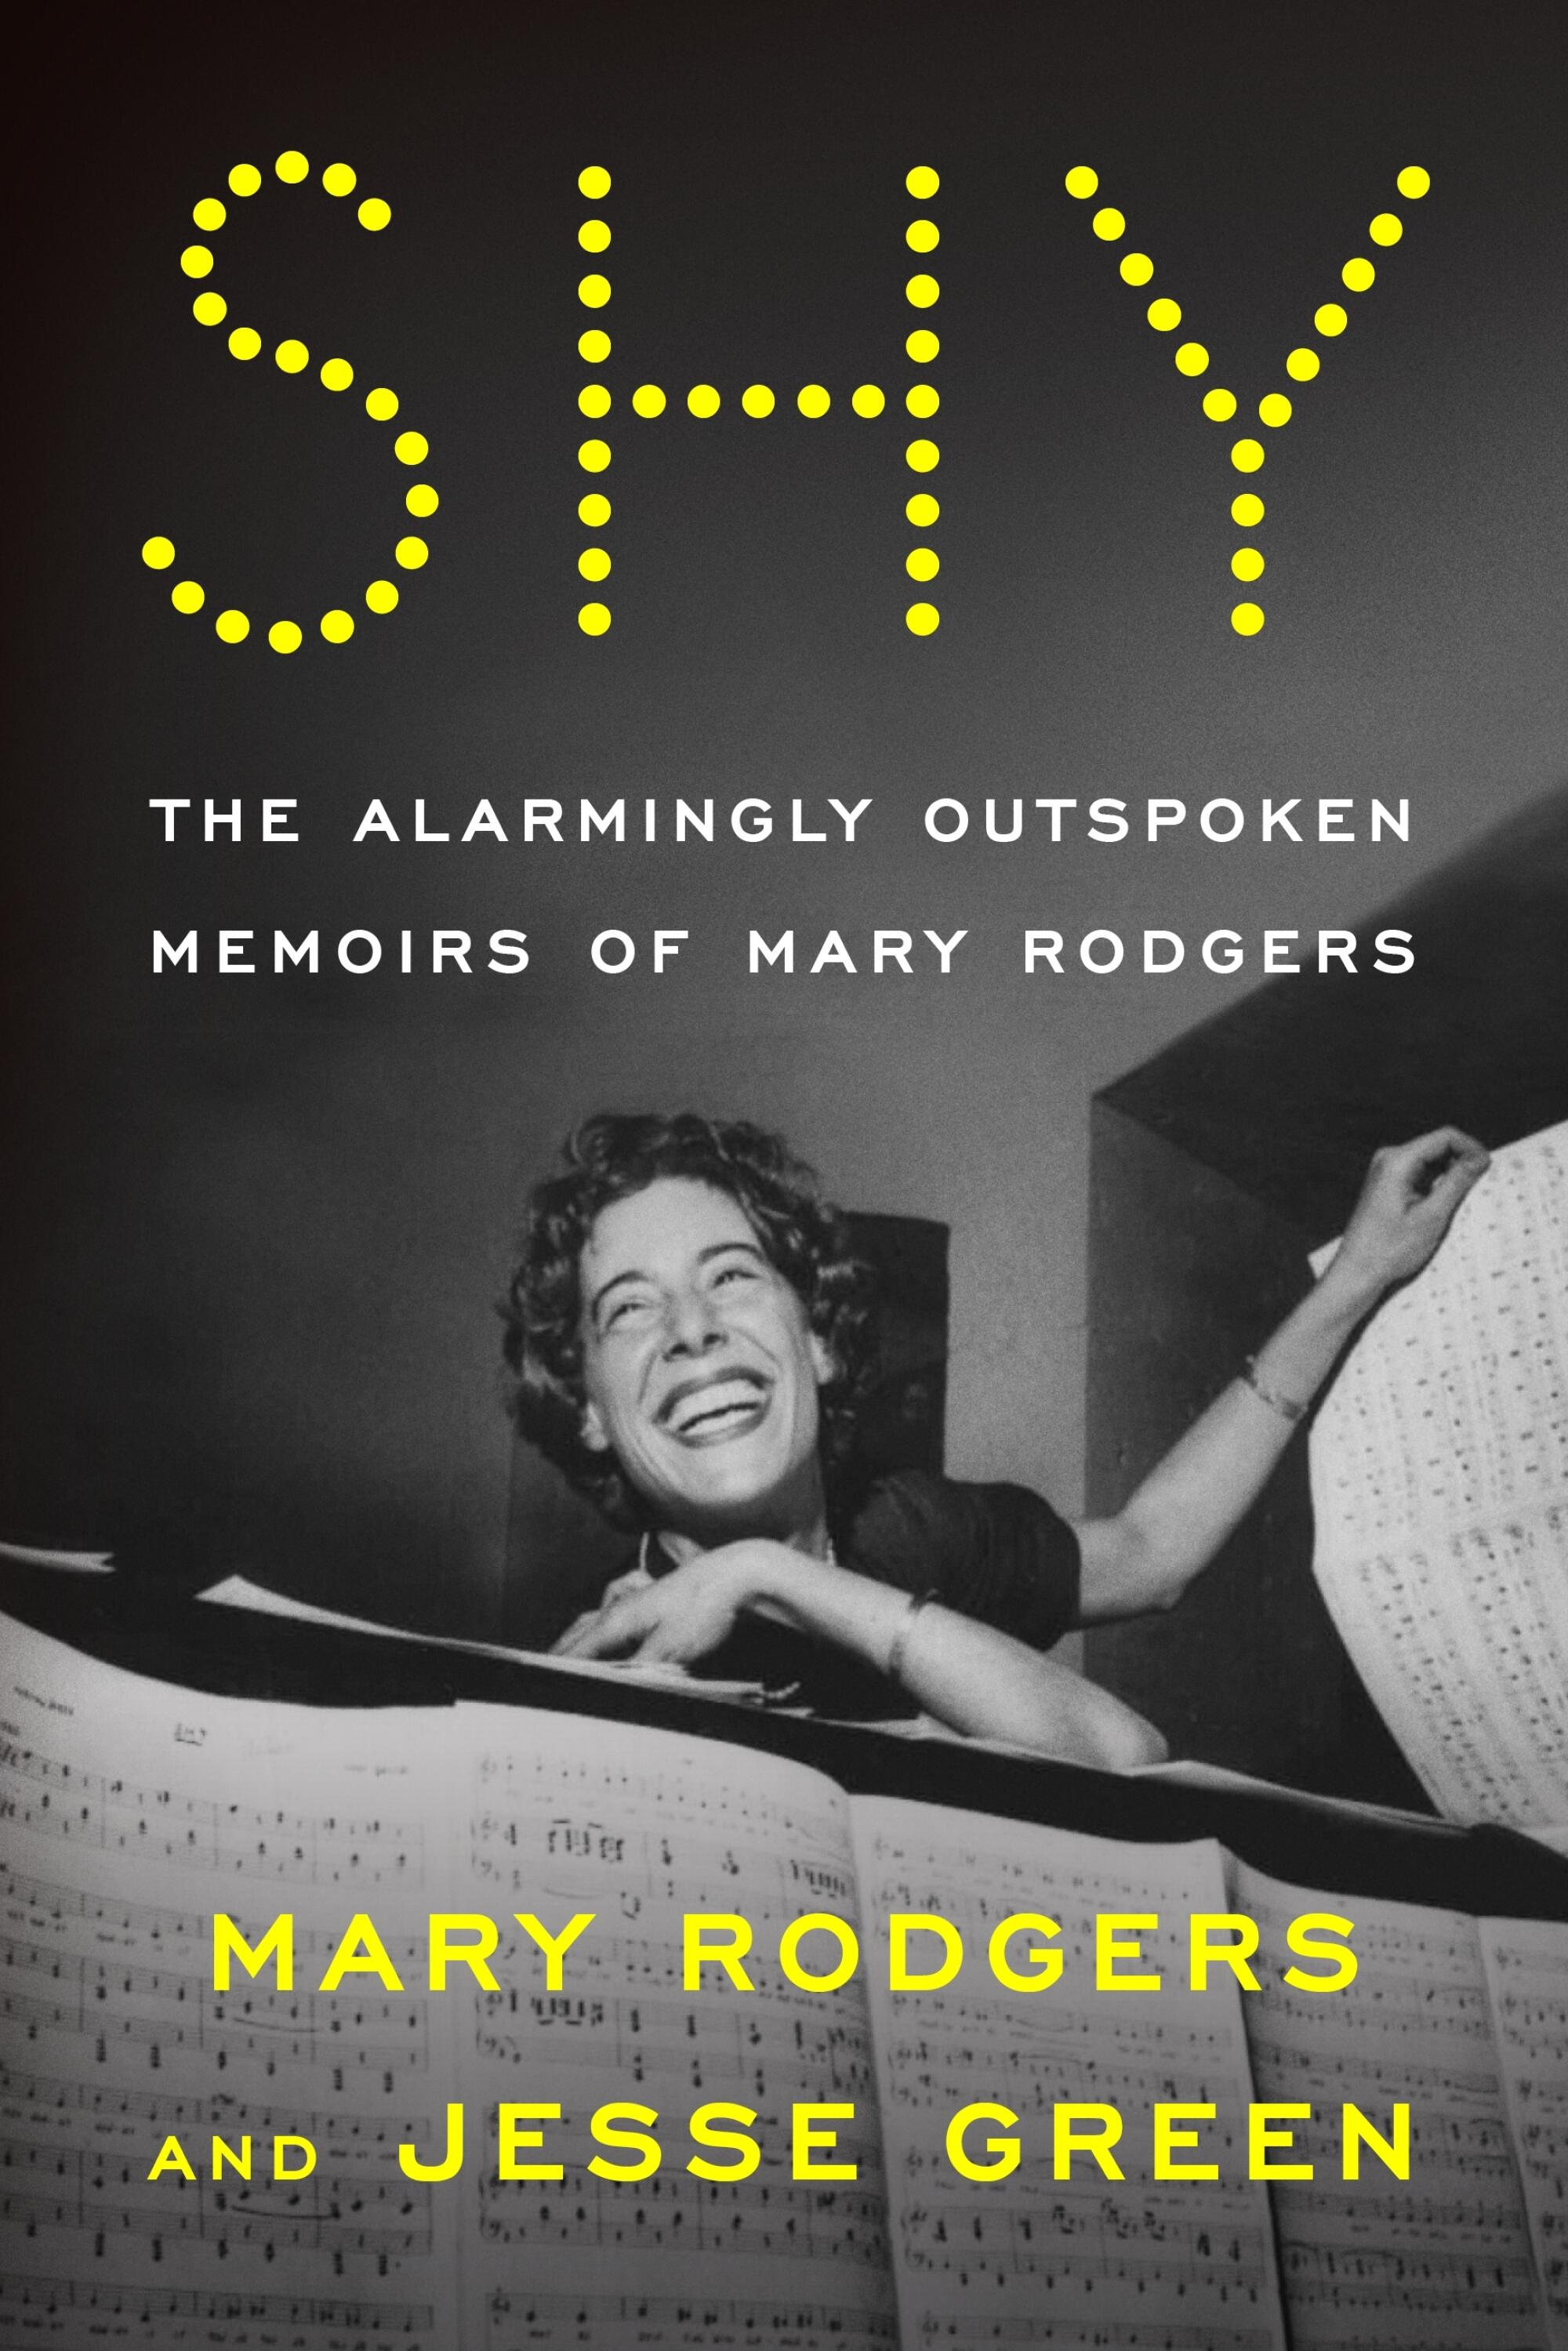 "Shy: The Alarmingly Outspoken Memoirs of Mary Rodgers" by Mary Rodgers and Jesse Green